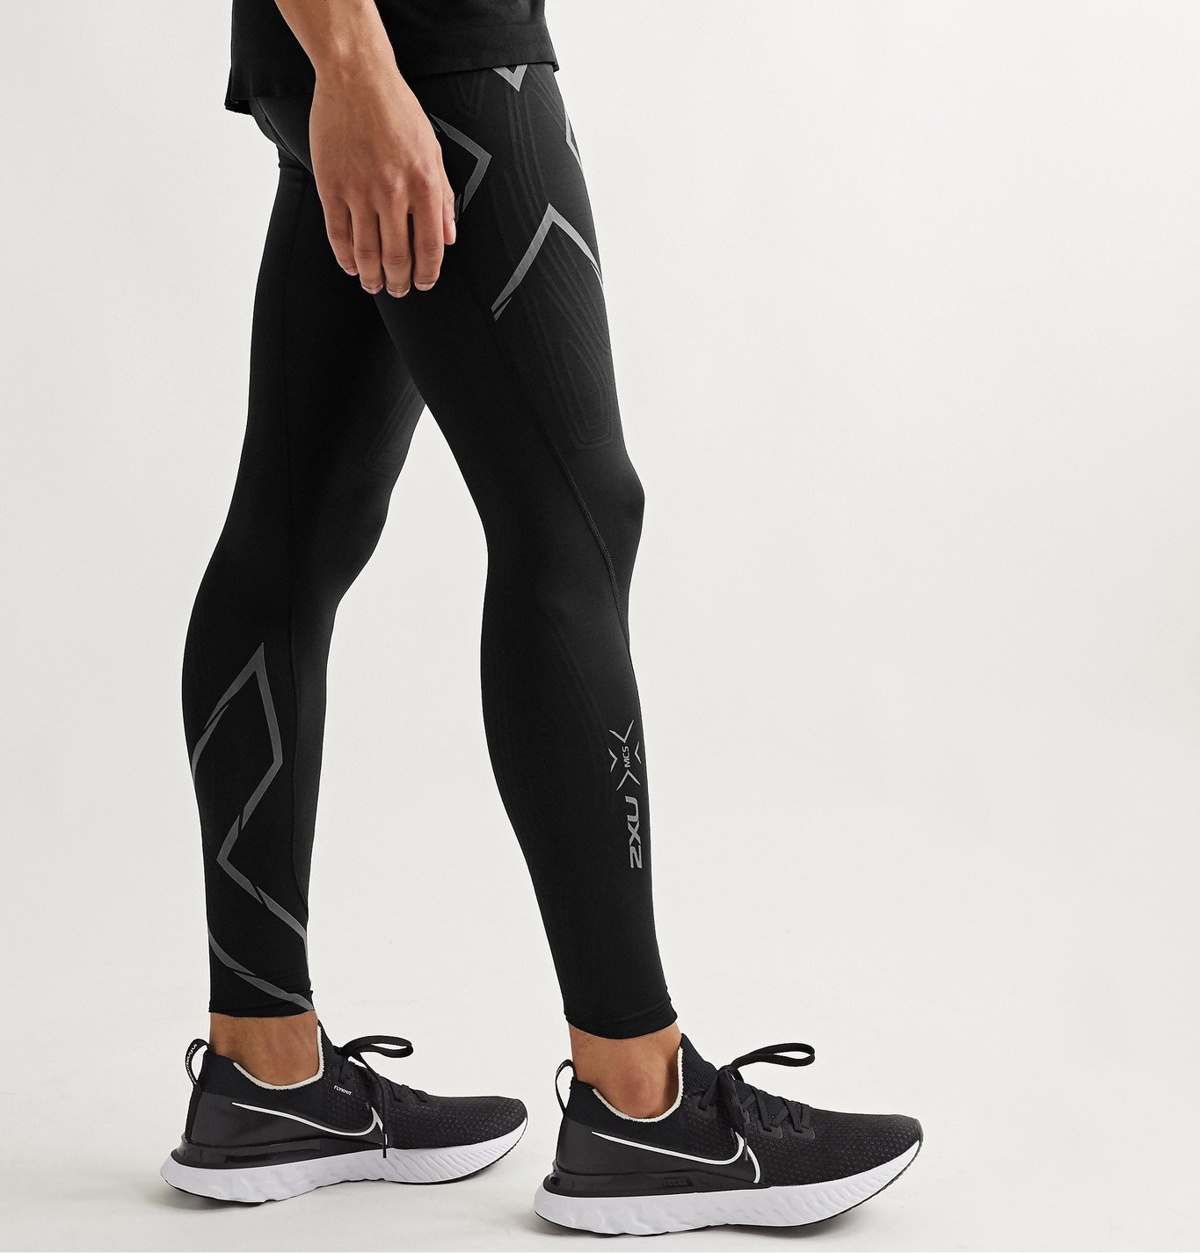 2XU Womens Running MCS Mapping Compression Tights